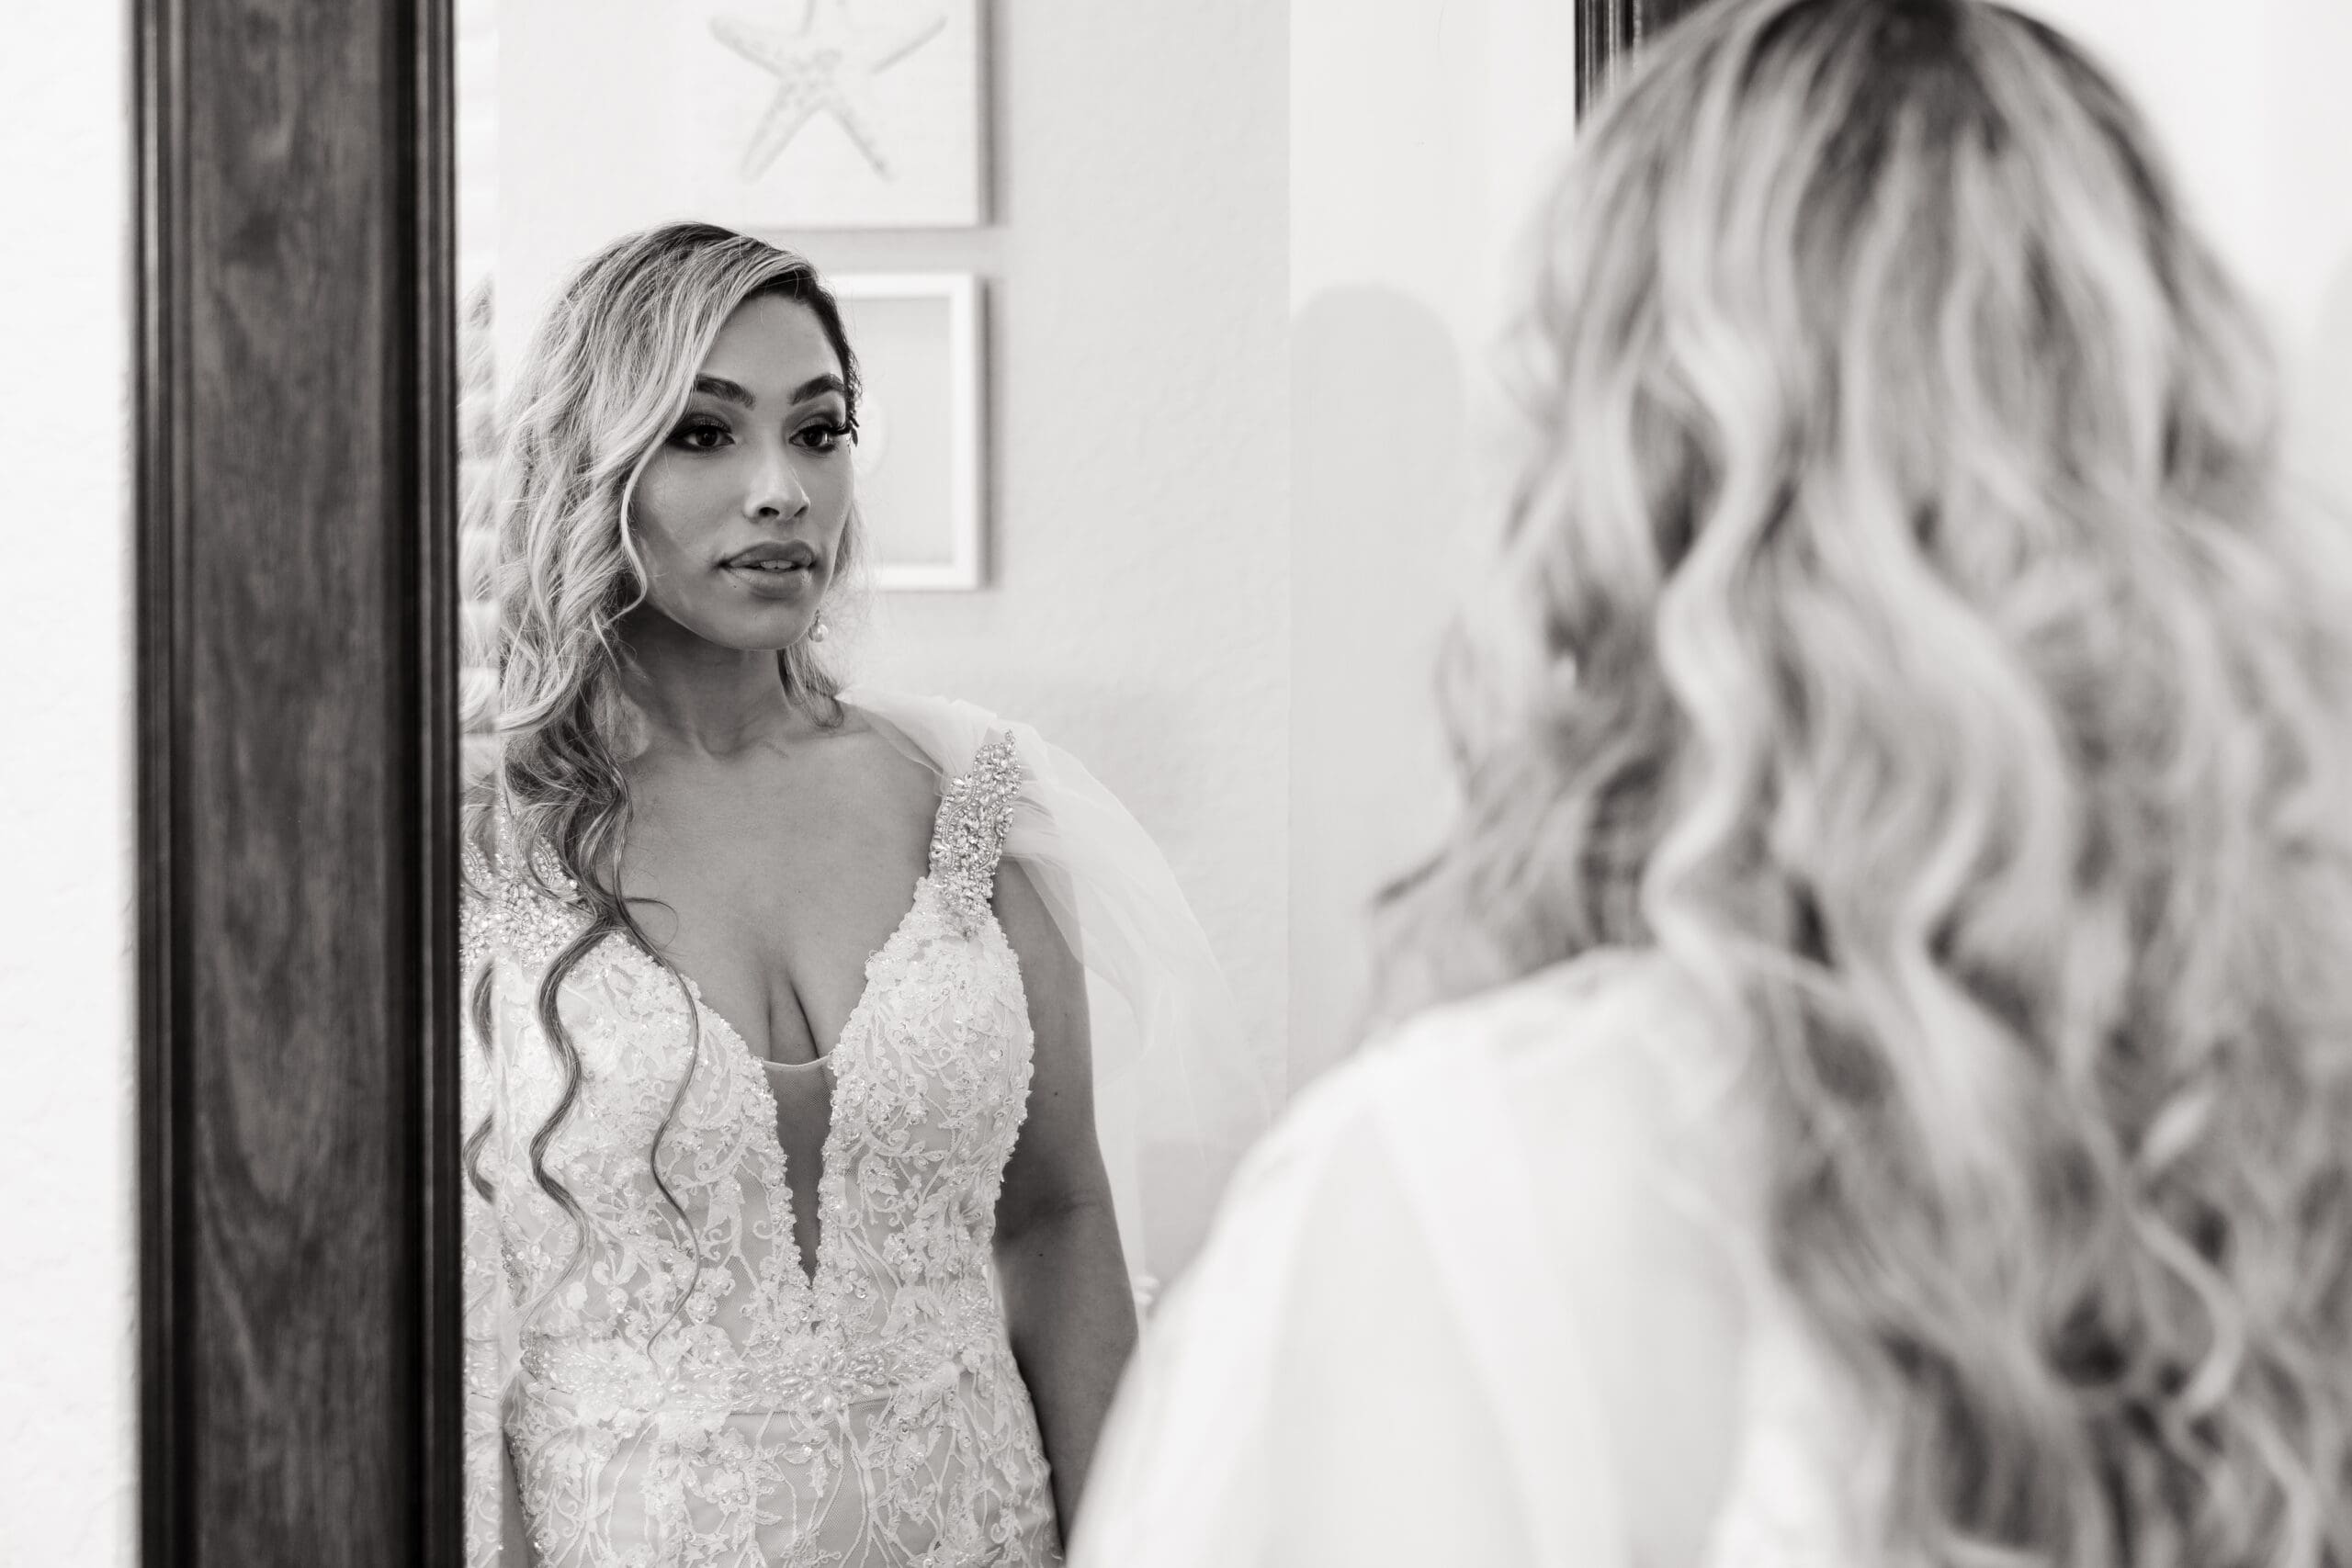 Black and white photo of Jenn admiring her final bridal look in the mirror of the bridal suite at the Crystal Ballroom.